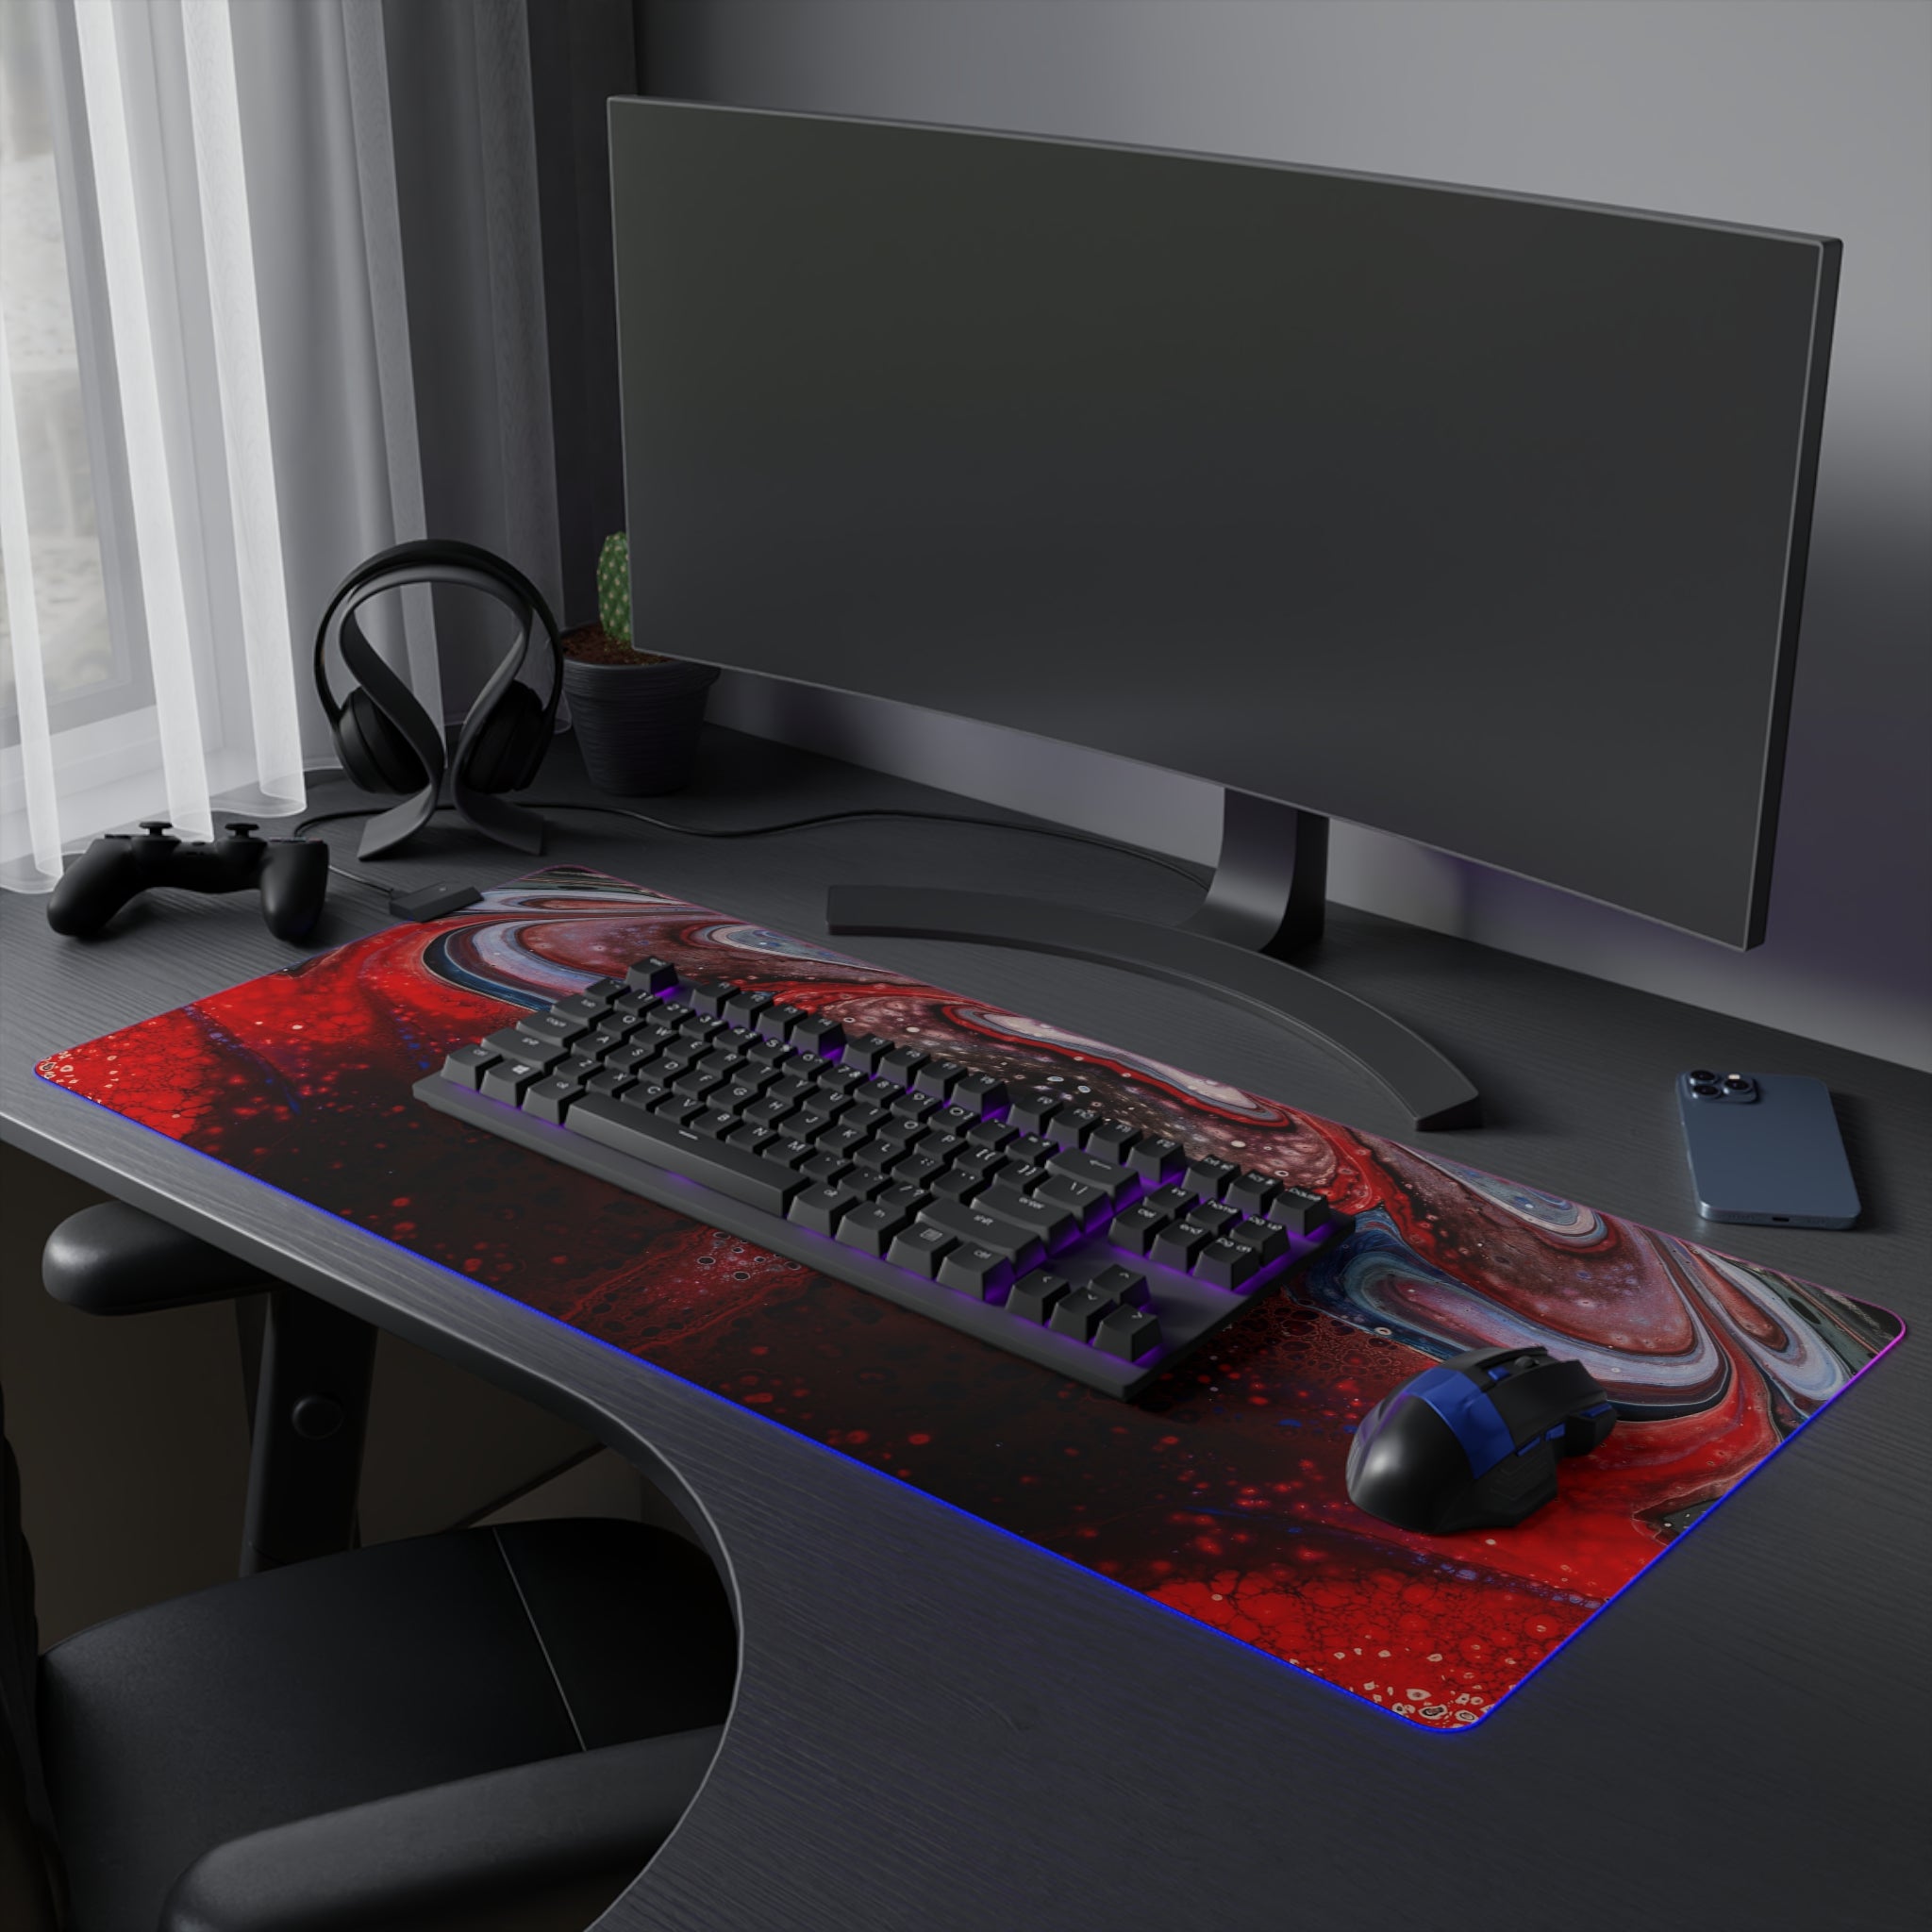 Cameron Creations - LED Gaming Mouse Pad - Window View - Concept 1